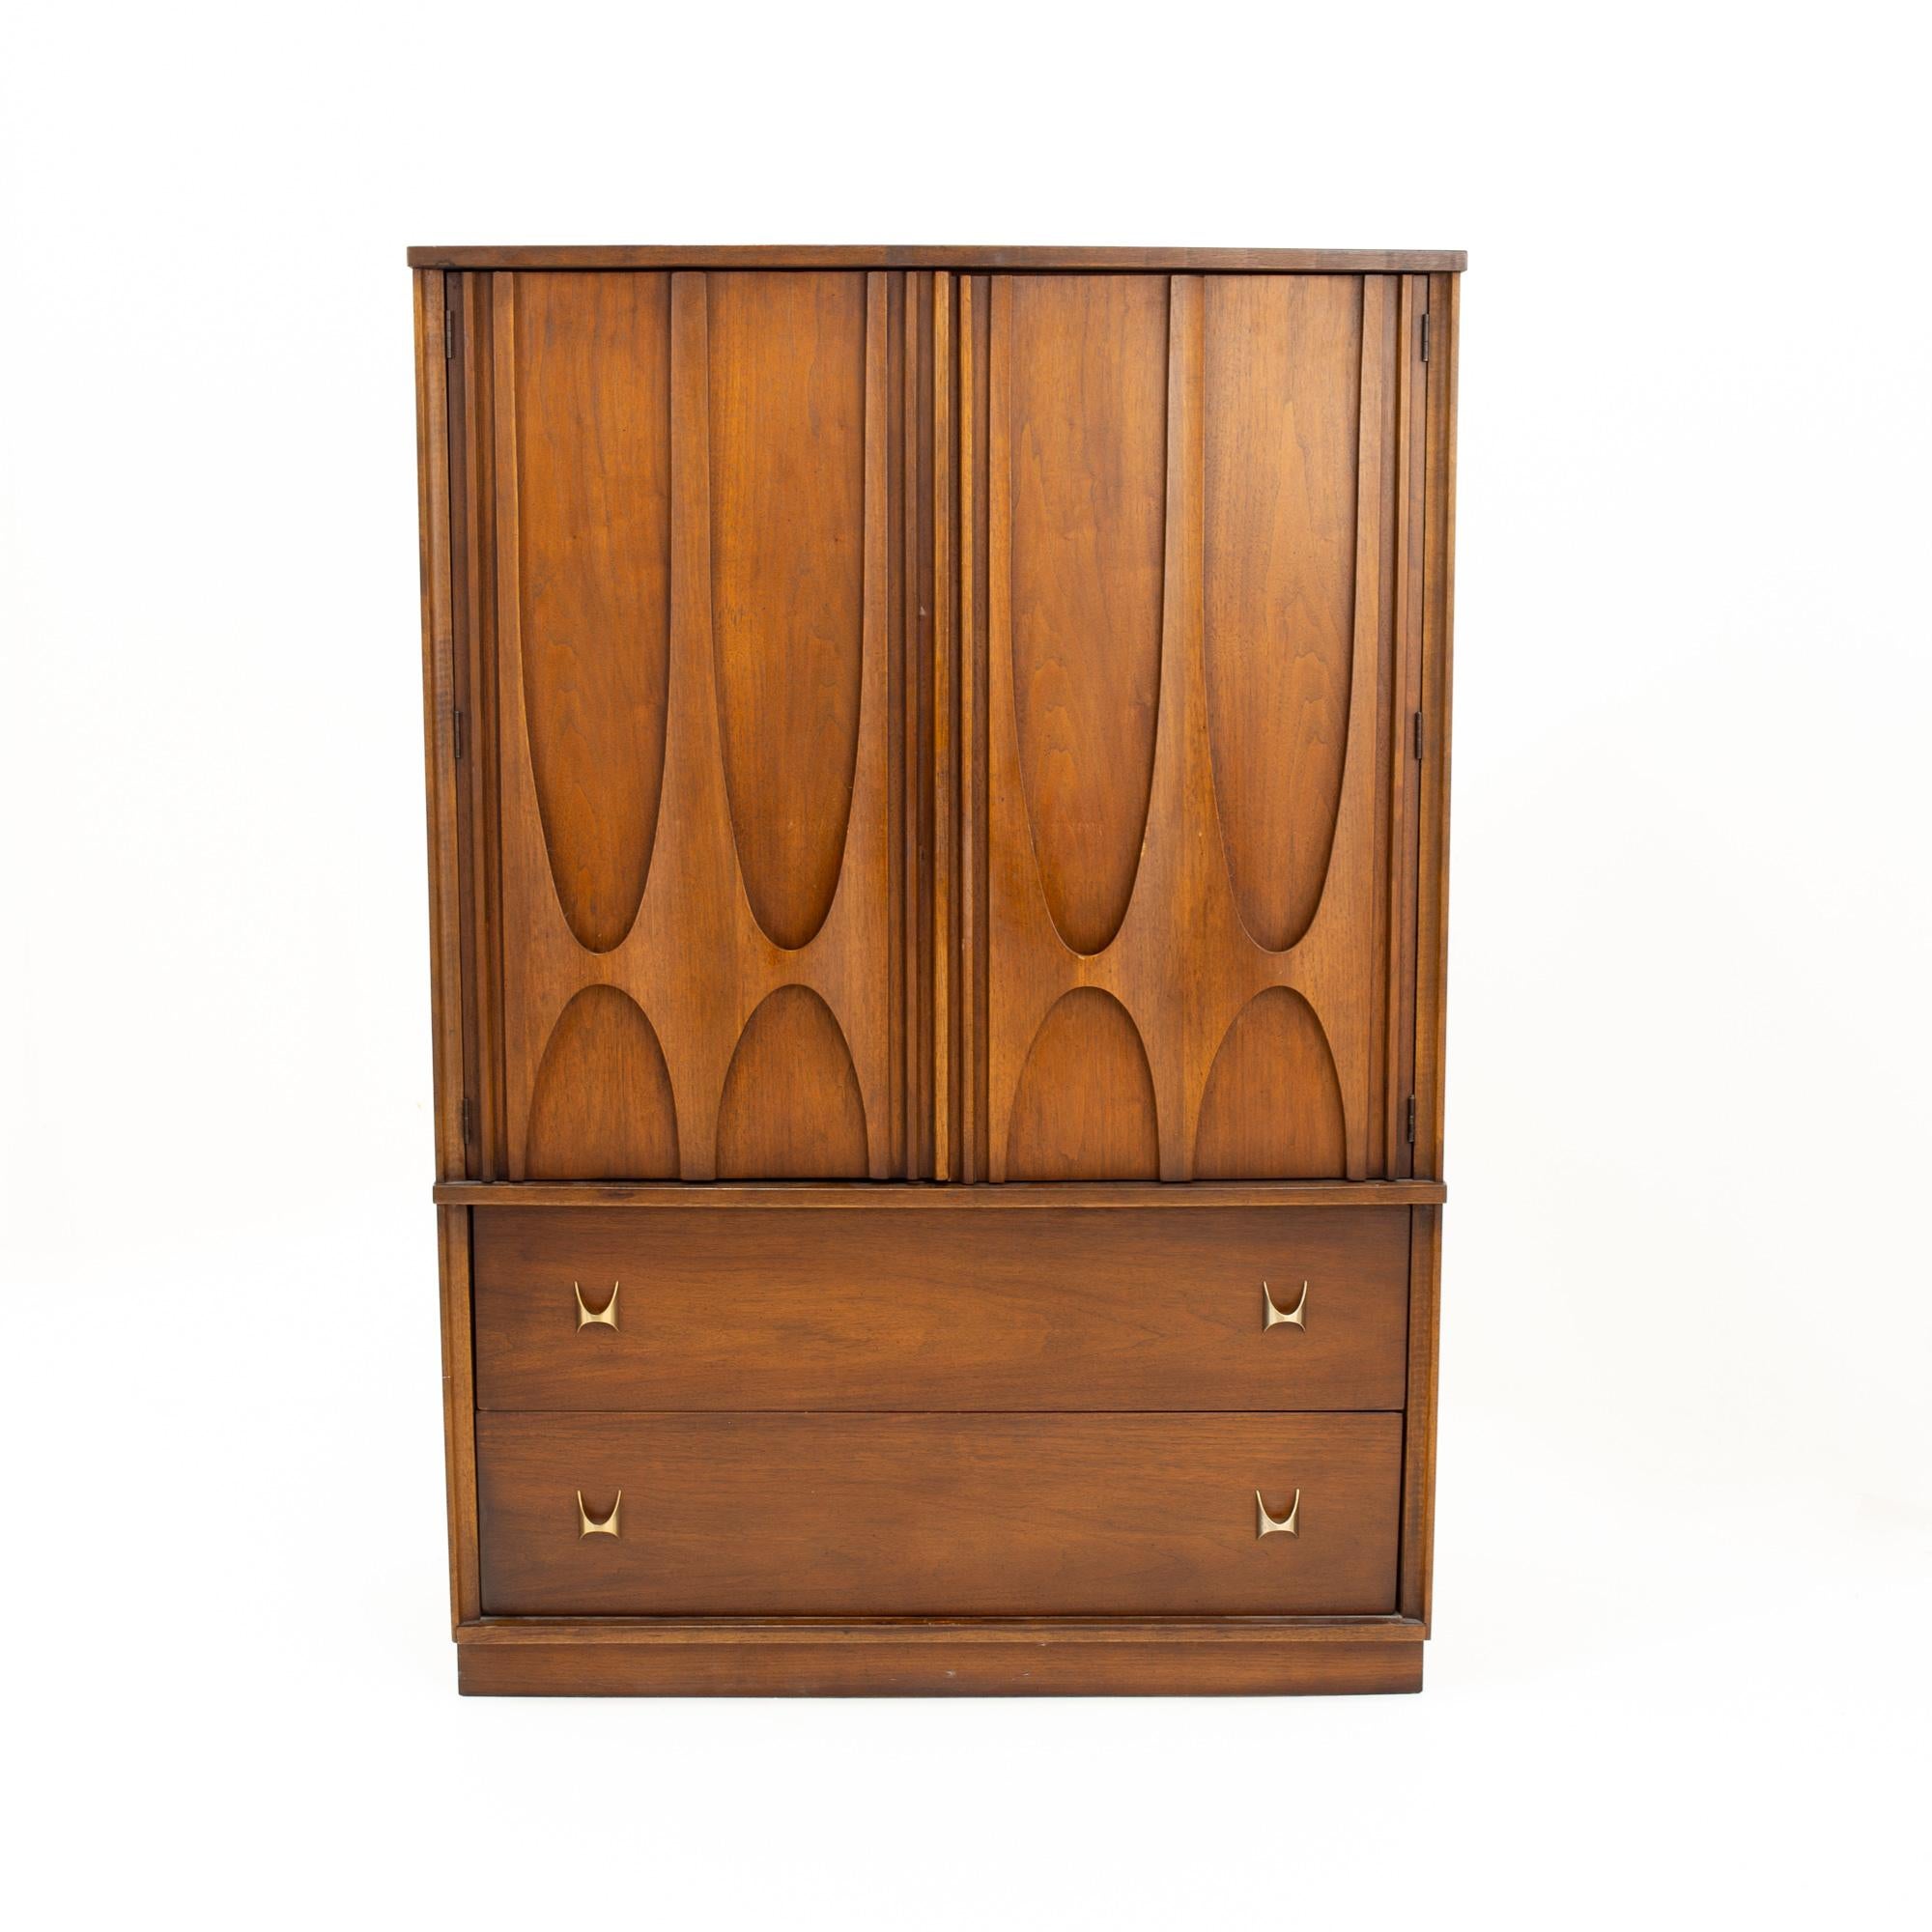 Broyhill Brasilia II Brutalist mid century walnut and brass armoire gentleman's chest
Chest measures: 40 wide x 19 deep x 58 inches high

All pieces of furniture can be had in what we call restored vintage condition. That means the piece is